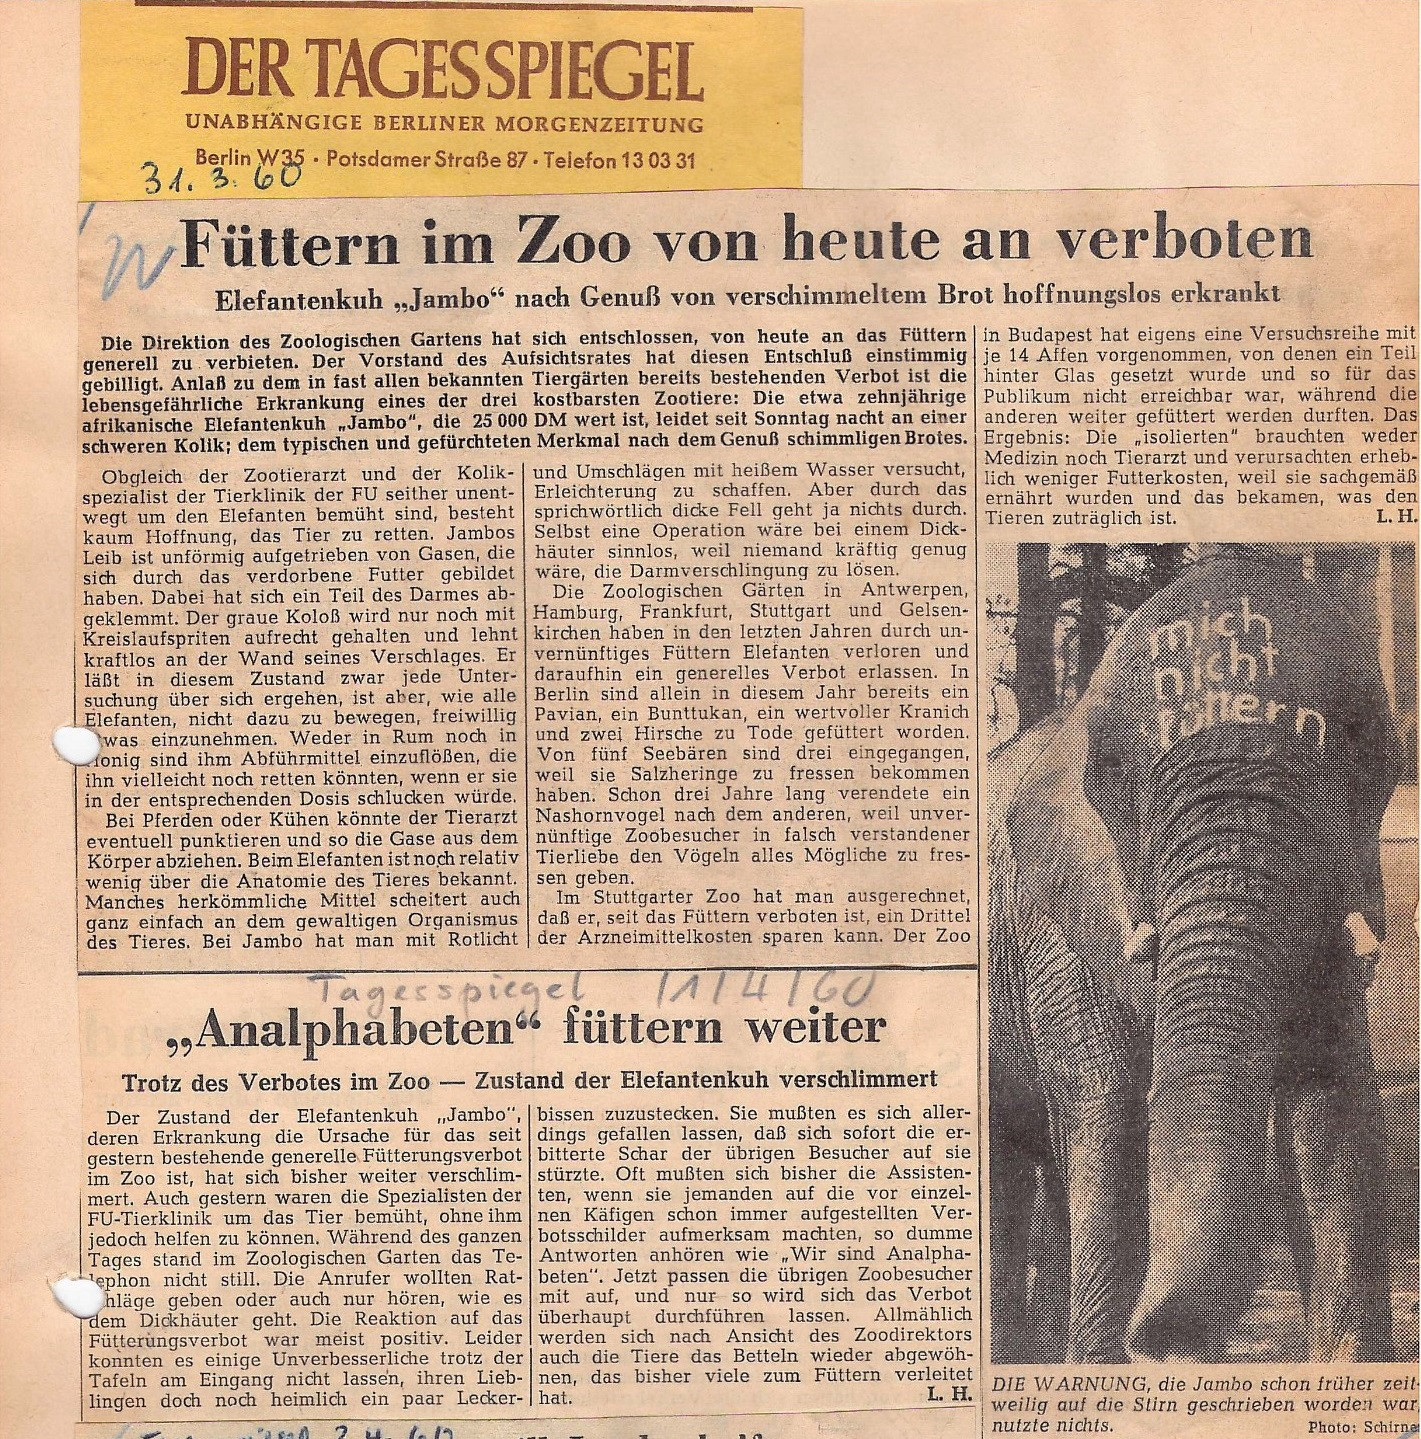 Newspaper cutting. Title above: Feeding prohibited at the zoo from today. Title below: These "Illiterates" continue to feed the animals, despite the zoo’s ban – elephant cow's condition worsens. Photograph: Front view of an elephant with "don't feed me" written in white on its forehead.